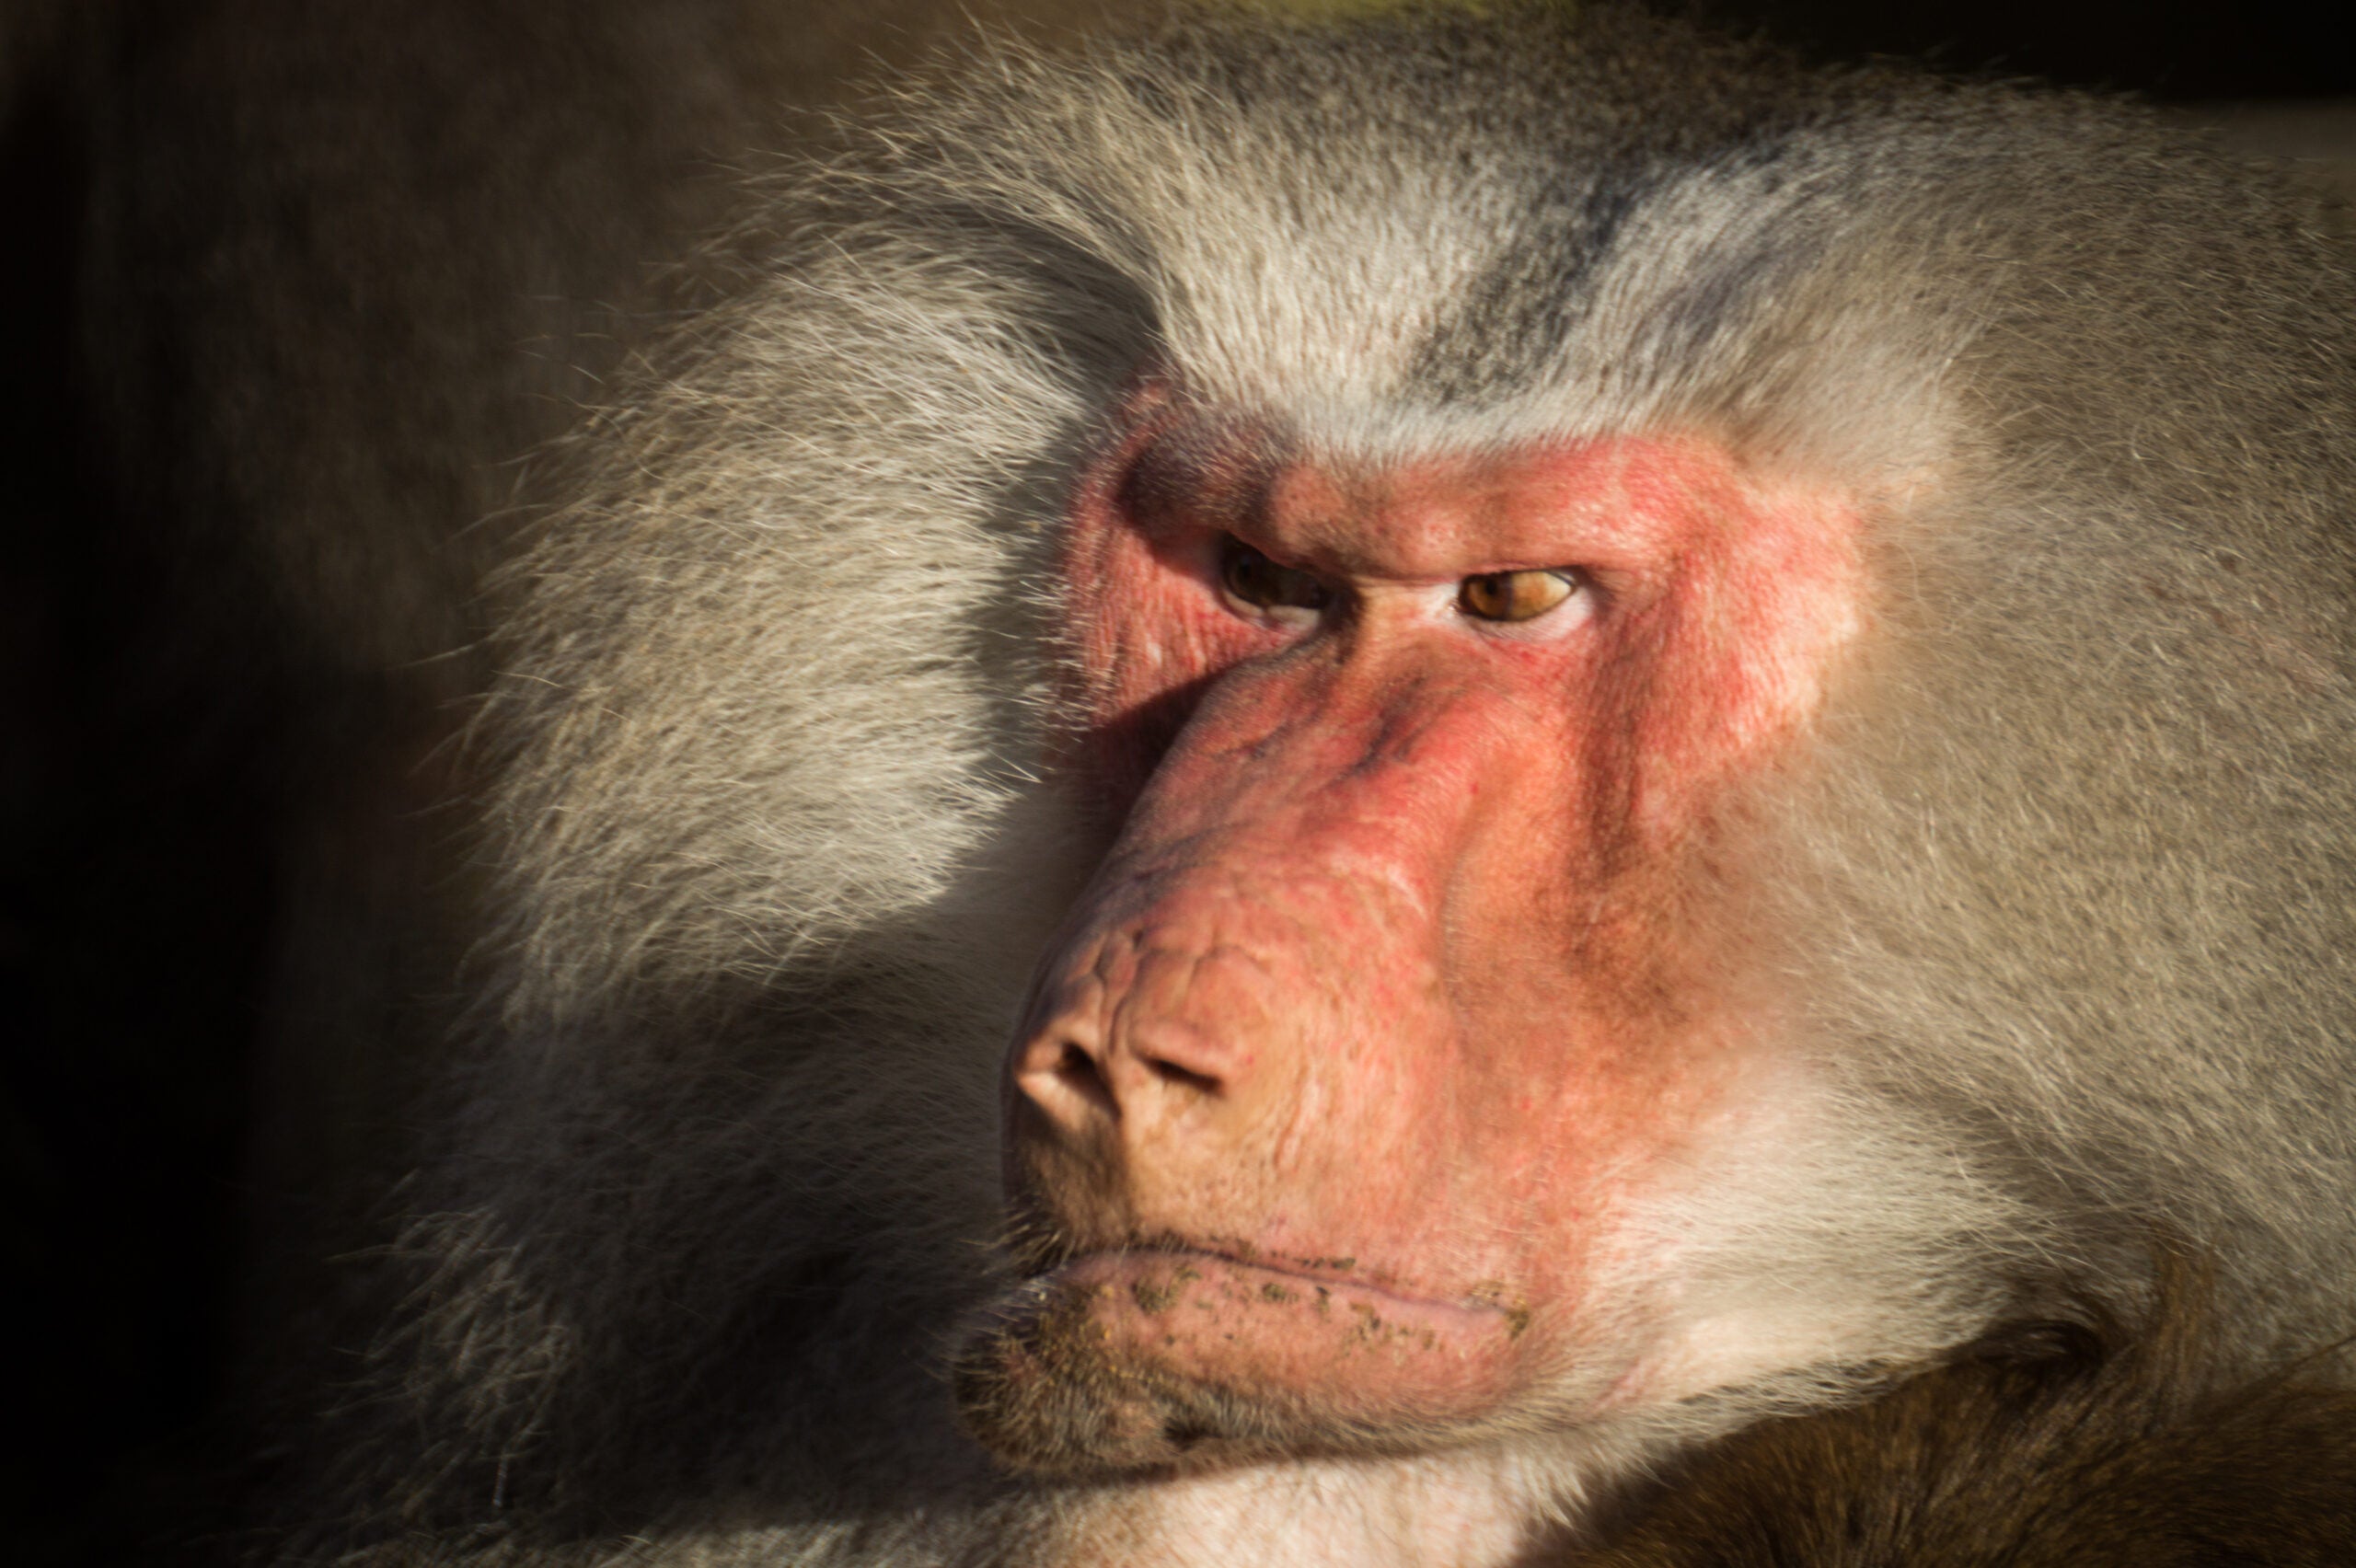 Monkeys that hav big ass lips On Swollen Butts Mouth Sacs And Other Sexual Preferences In The Animal Kingdom